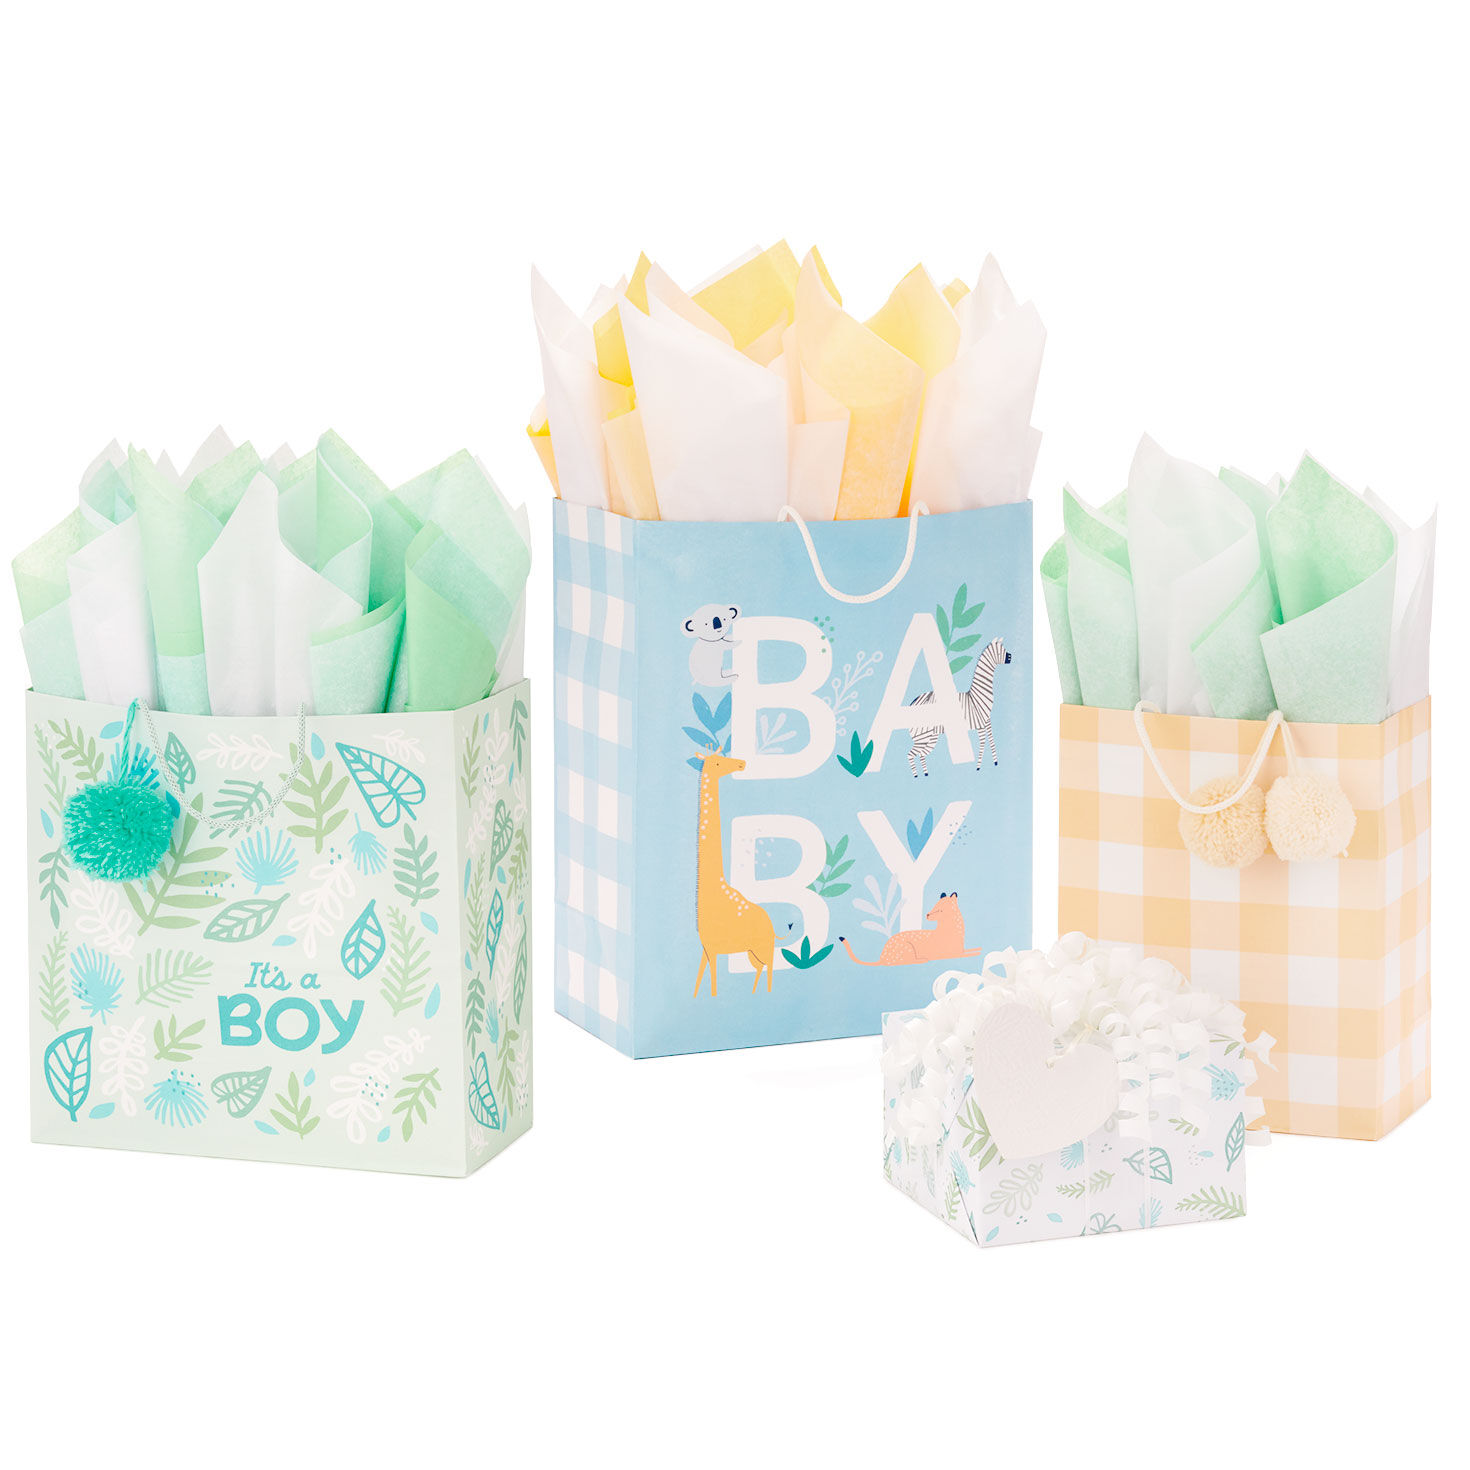 Baby Showers Kids Parties and More Hallmark 20 Oversized Gift Bag Assortment with Tissue Paper Pack of 5 Gift Bags for Birthdays 